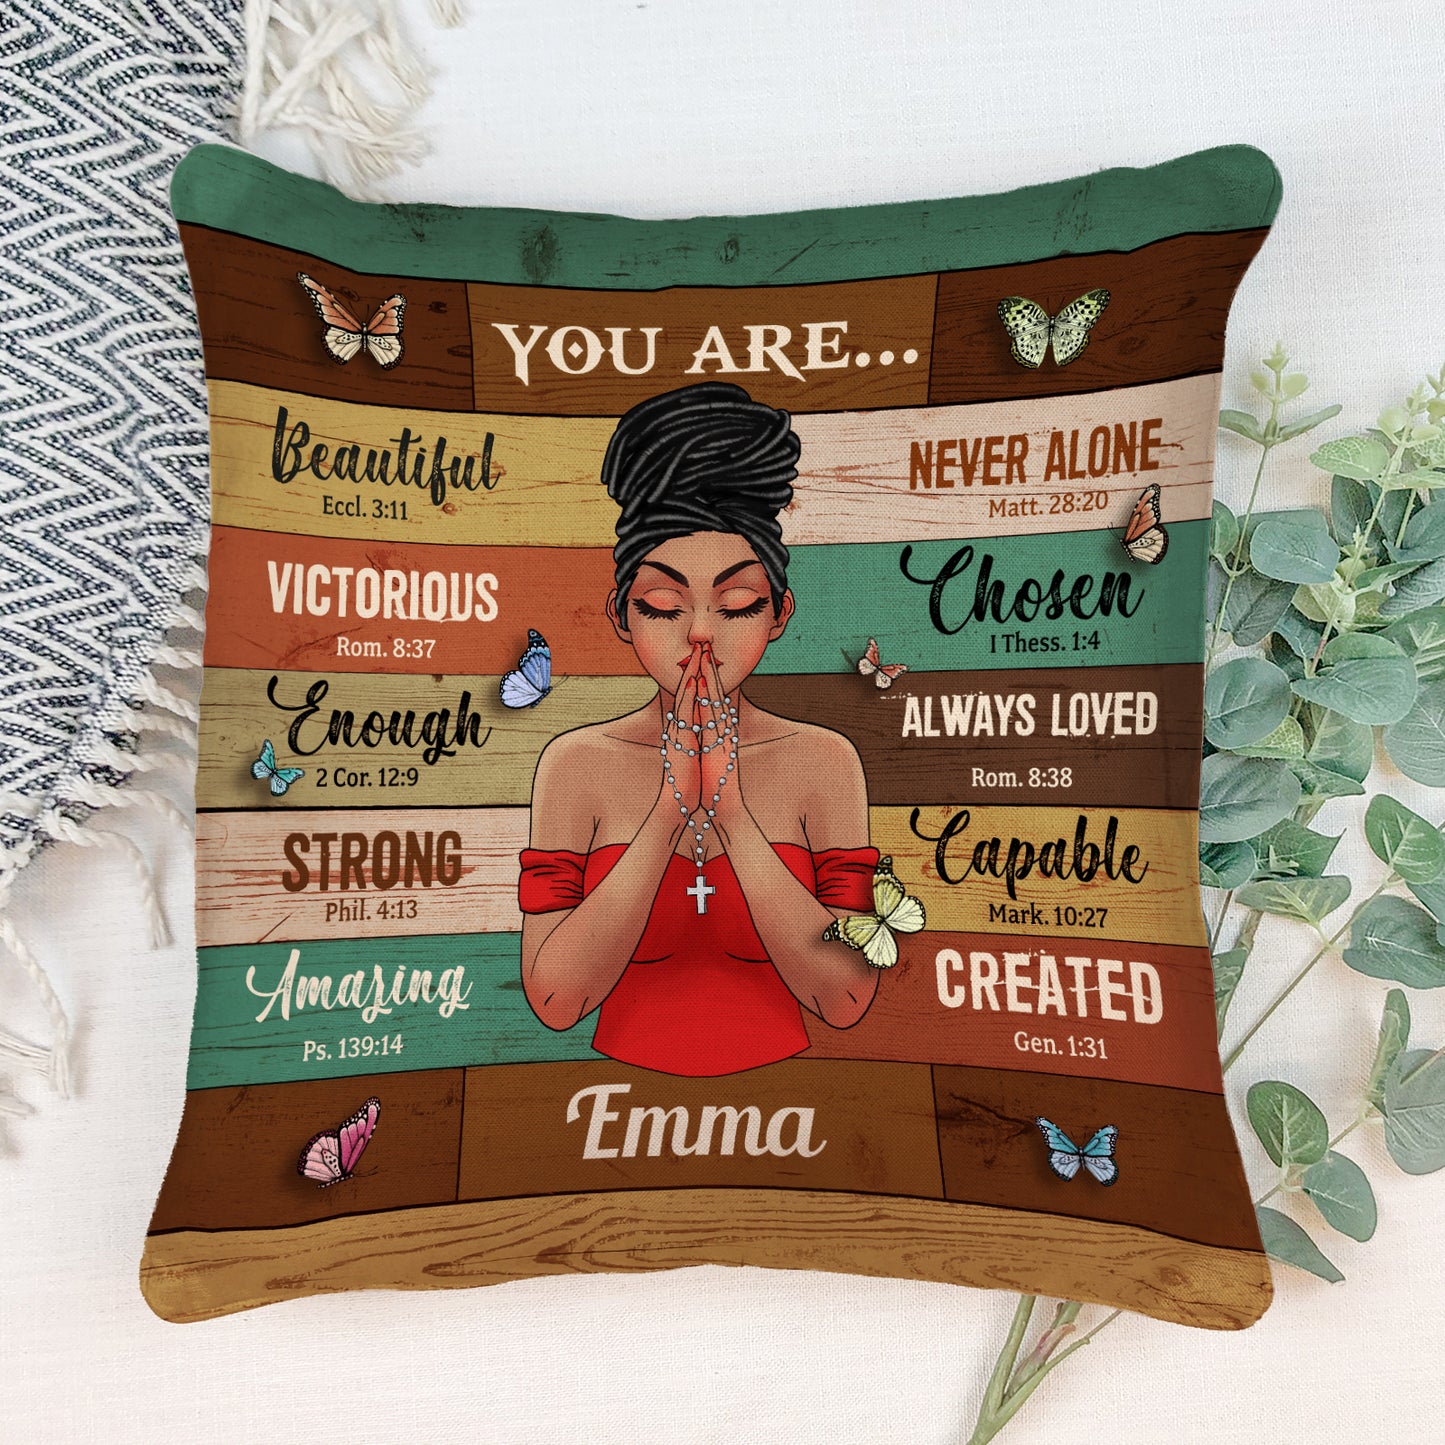 You're Beautiful Victorious - Personalized Pillow - Birthday Gift For Black Women, Christians